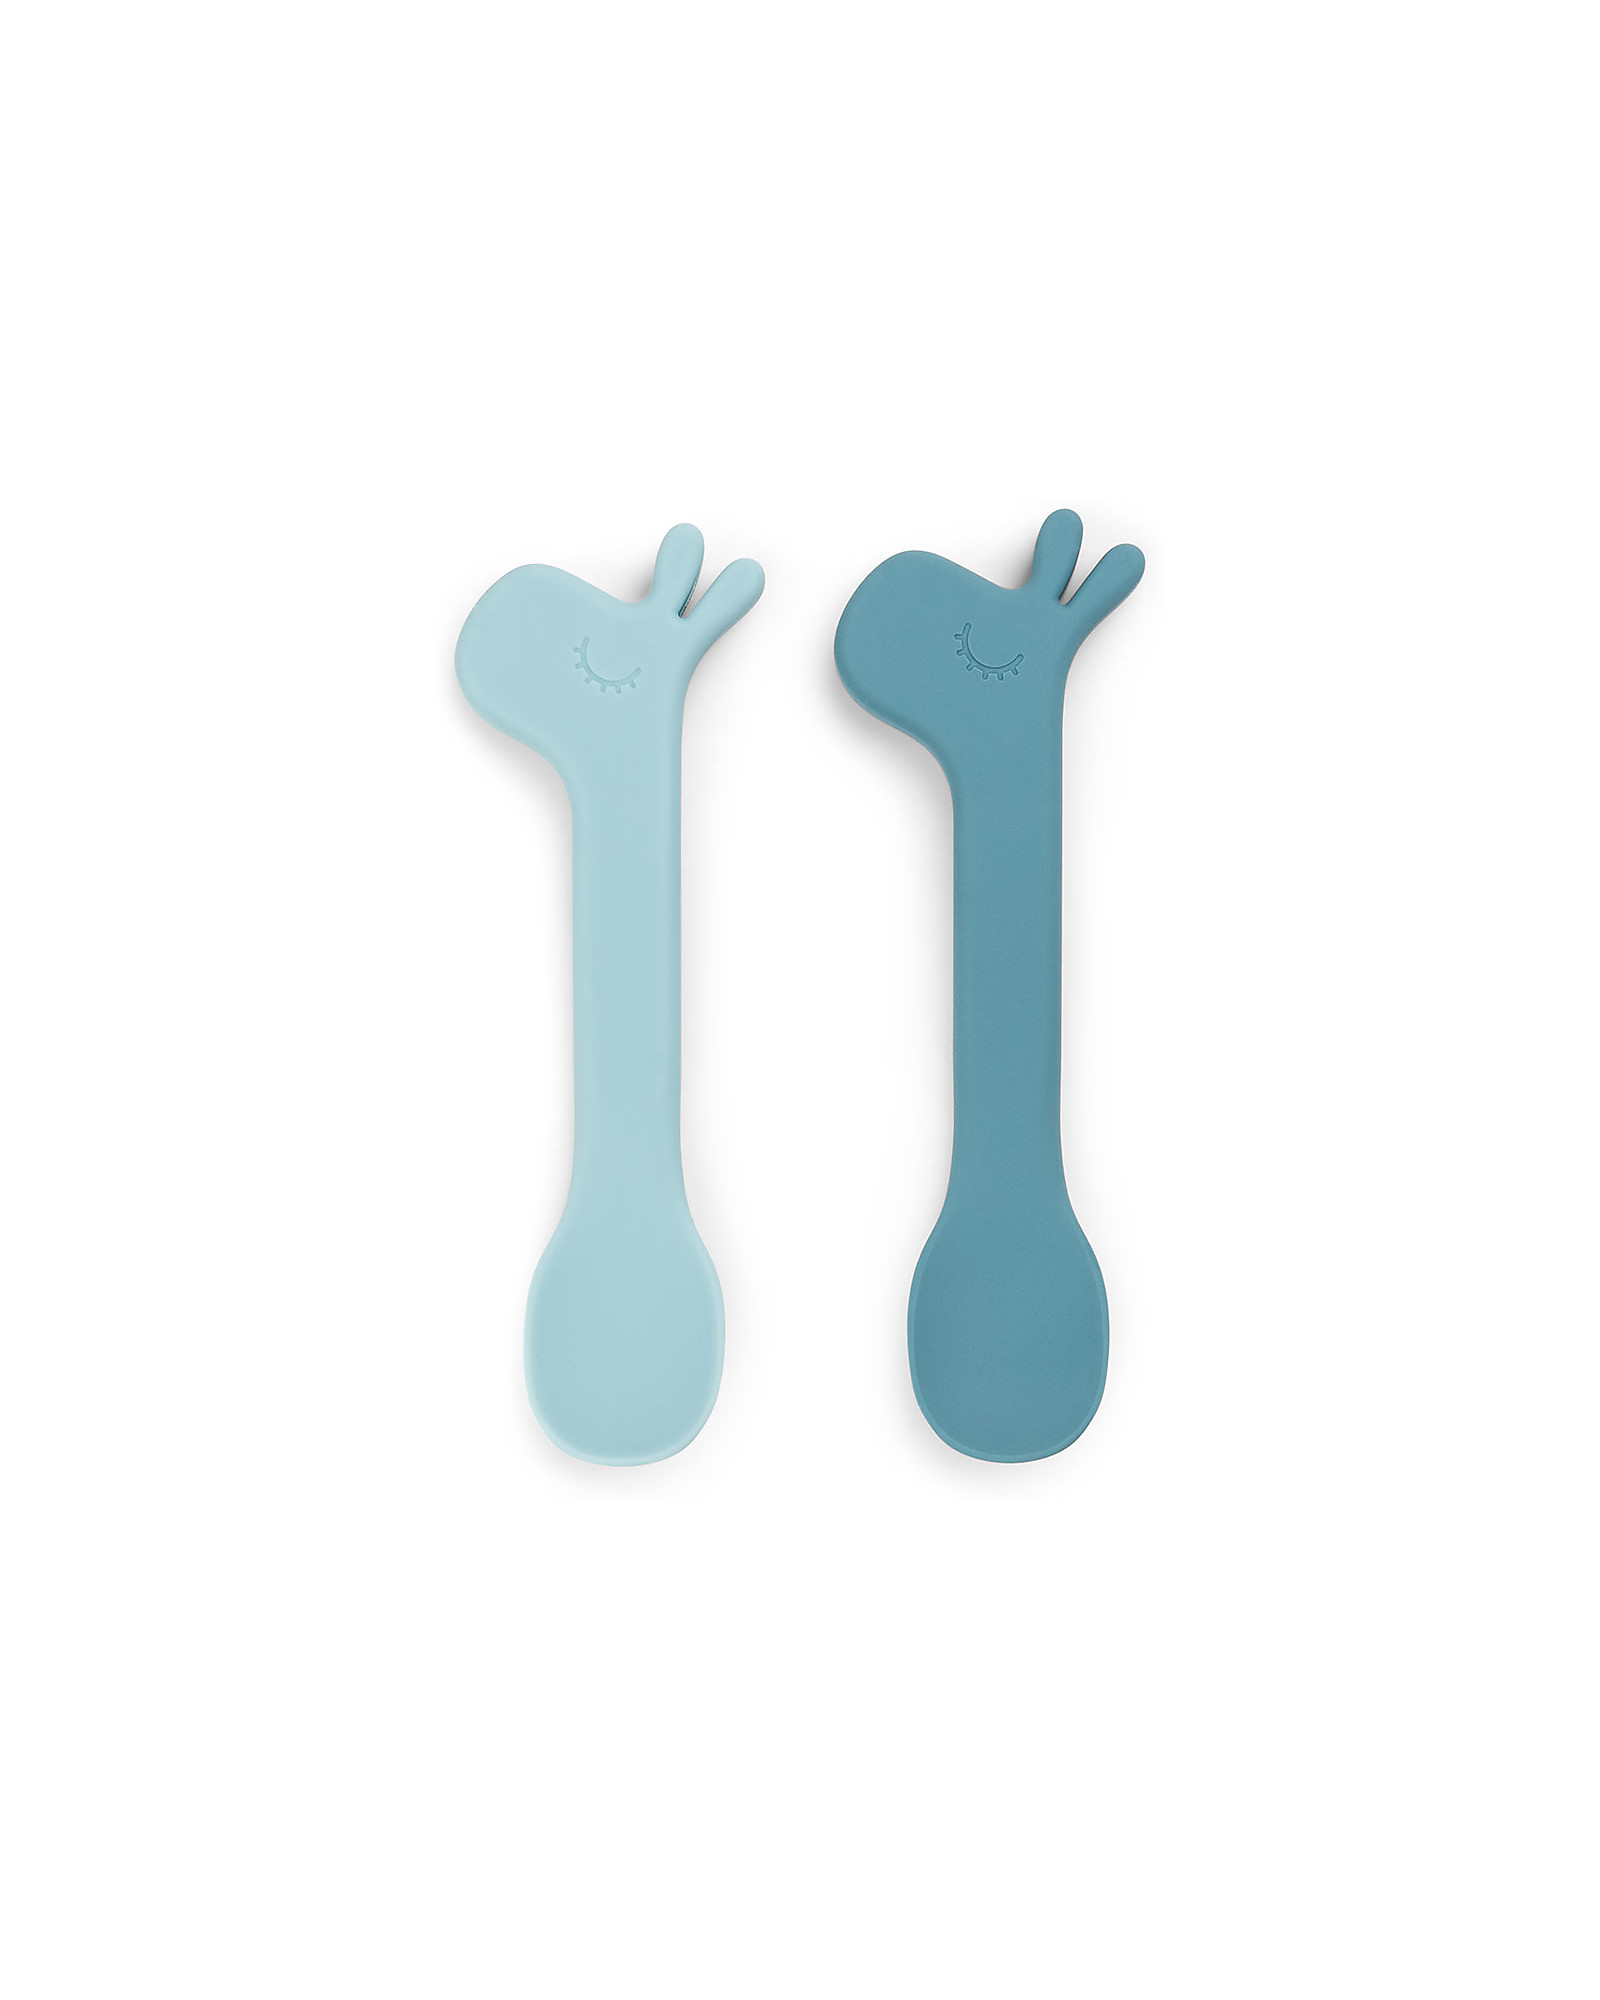 https://data.family-nation.com/imgprodotto/done-by-deer-silicone-baby-spoon-2-pack-lalee-blue-cutlery_469163_zoom.jpg